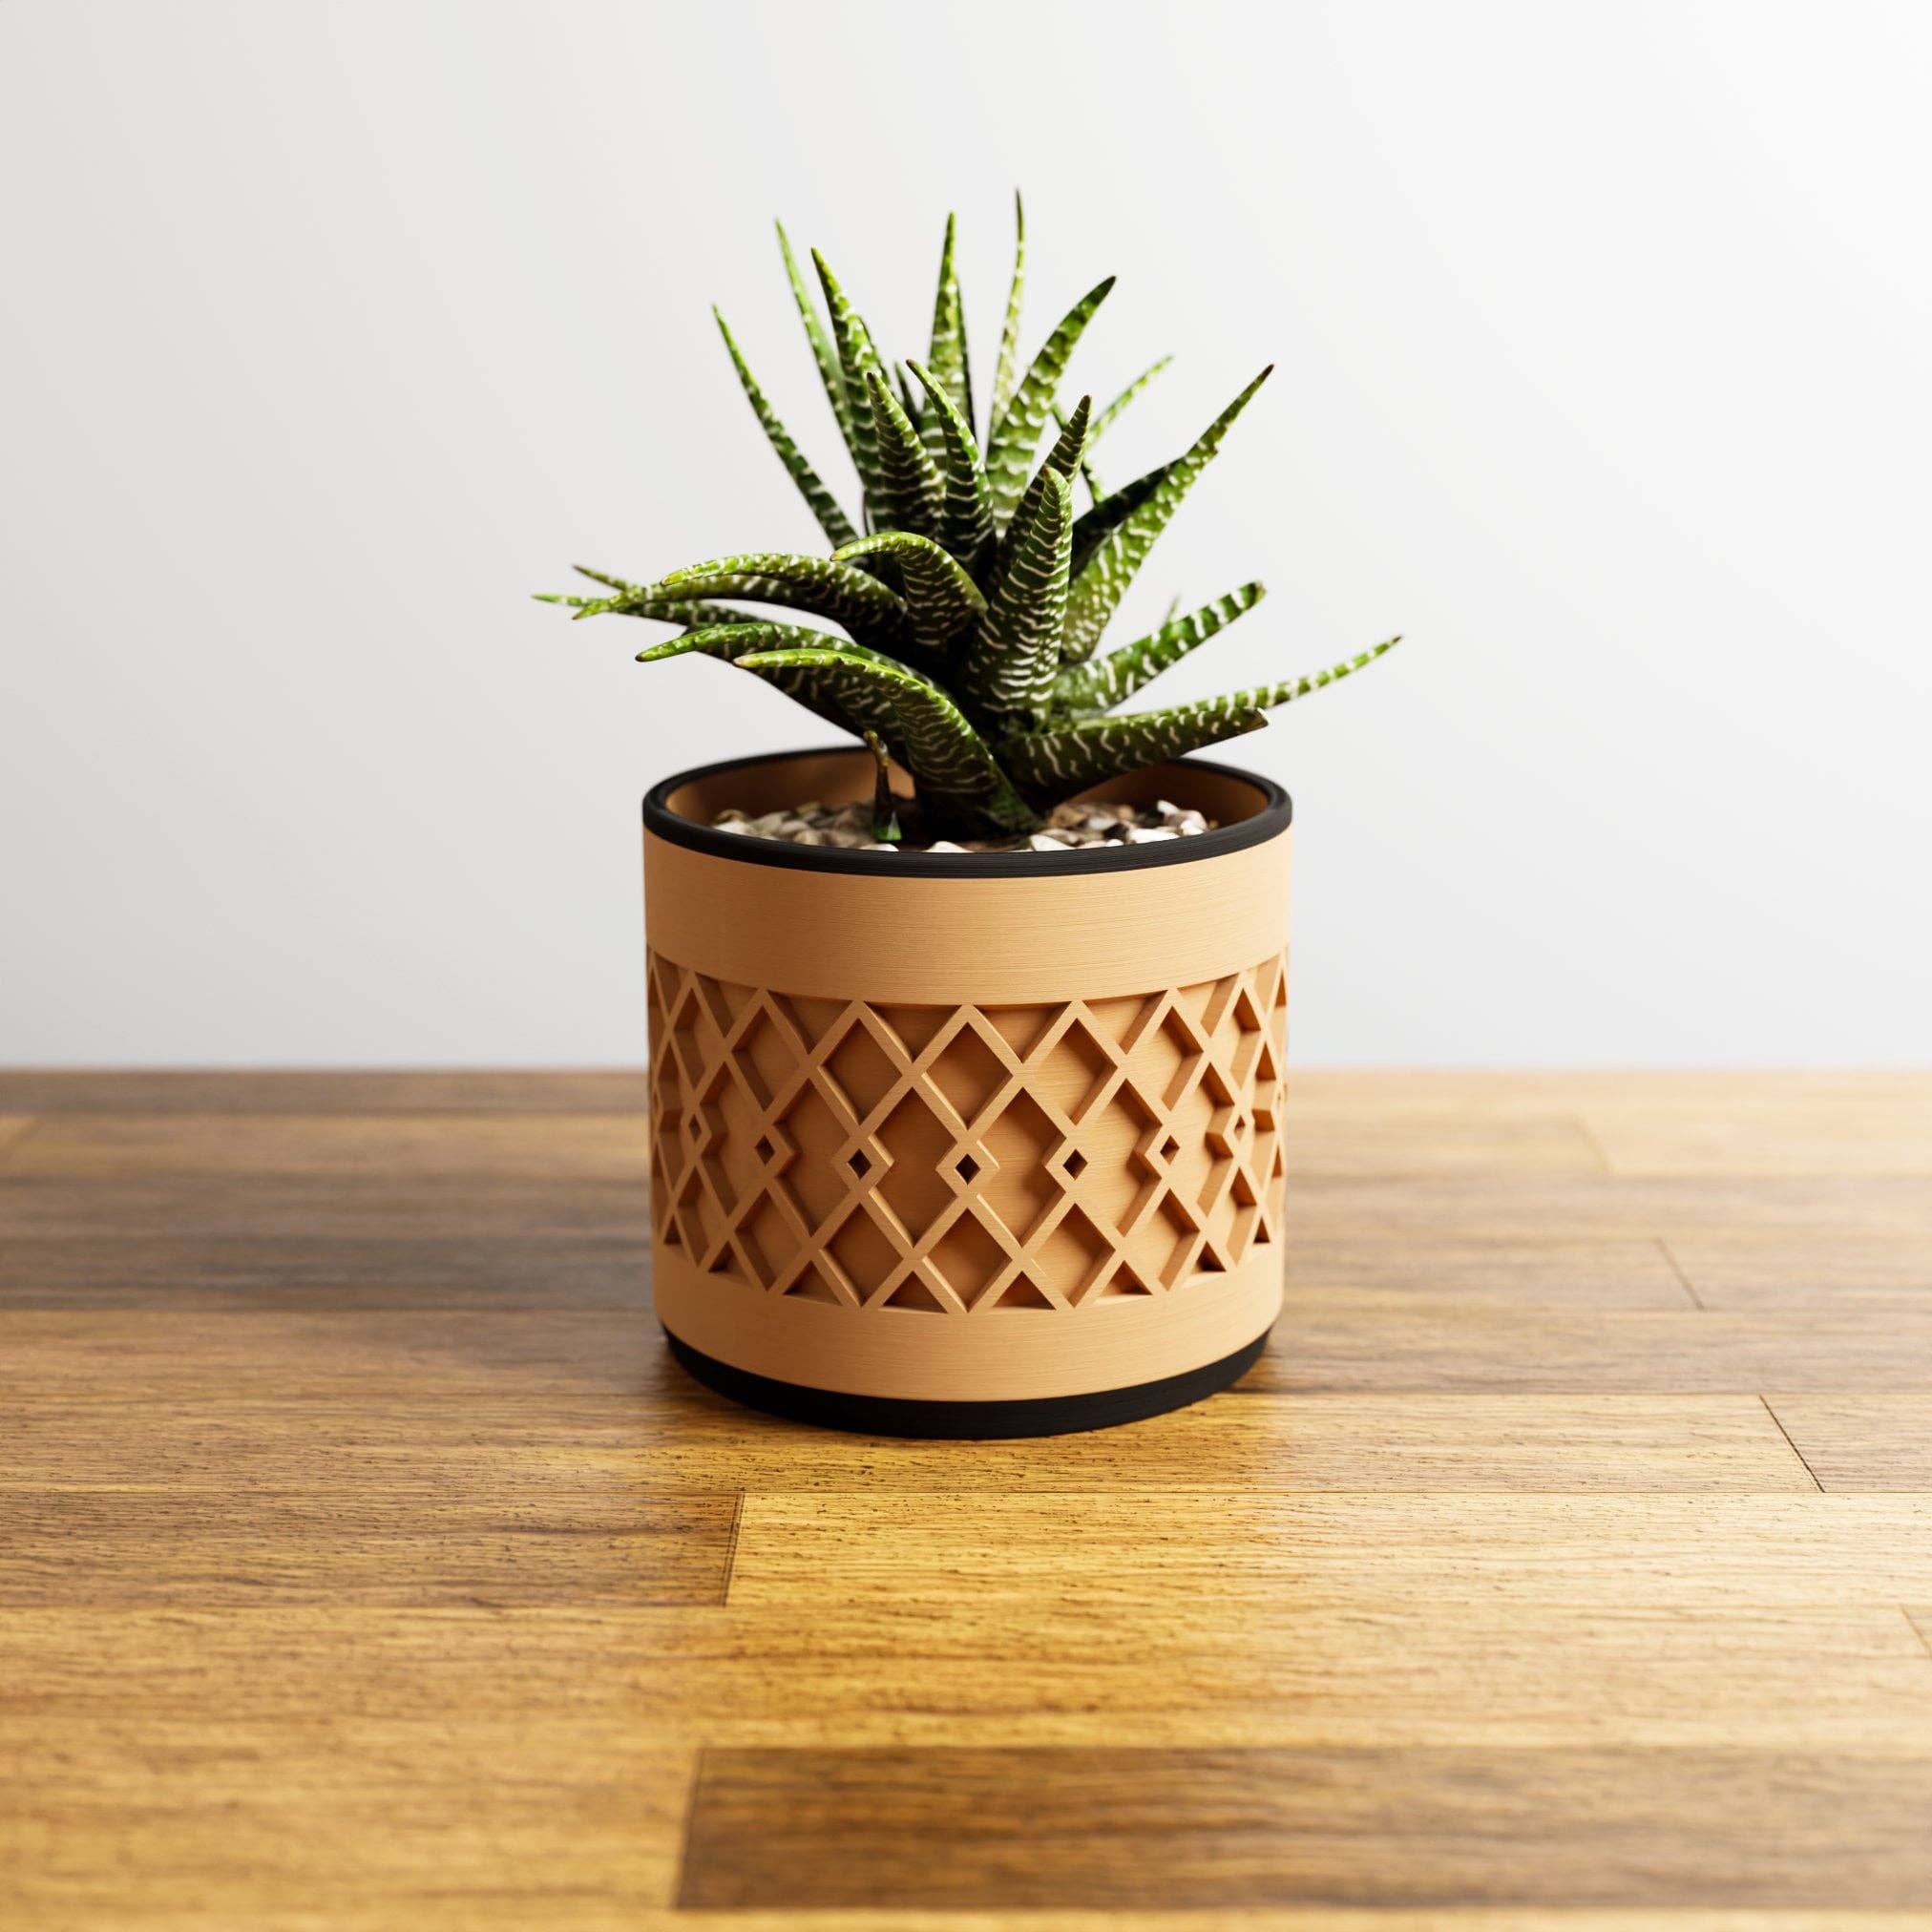 EARTH Planter - Stylish Simplicity: 3.5 Inches / Natural